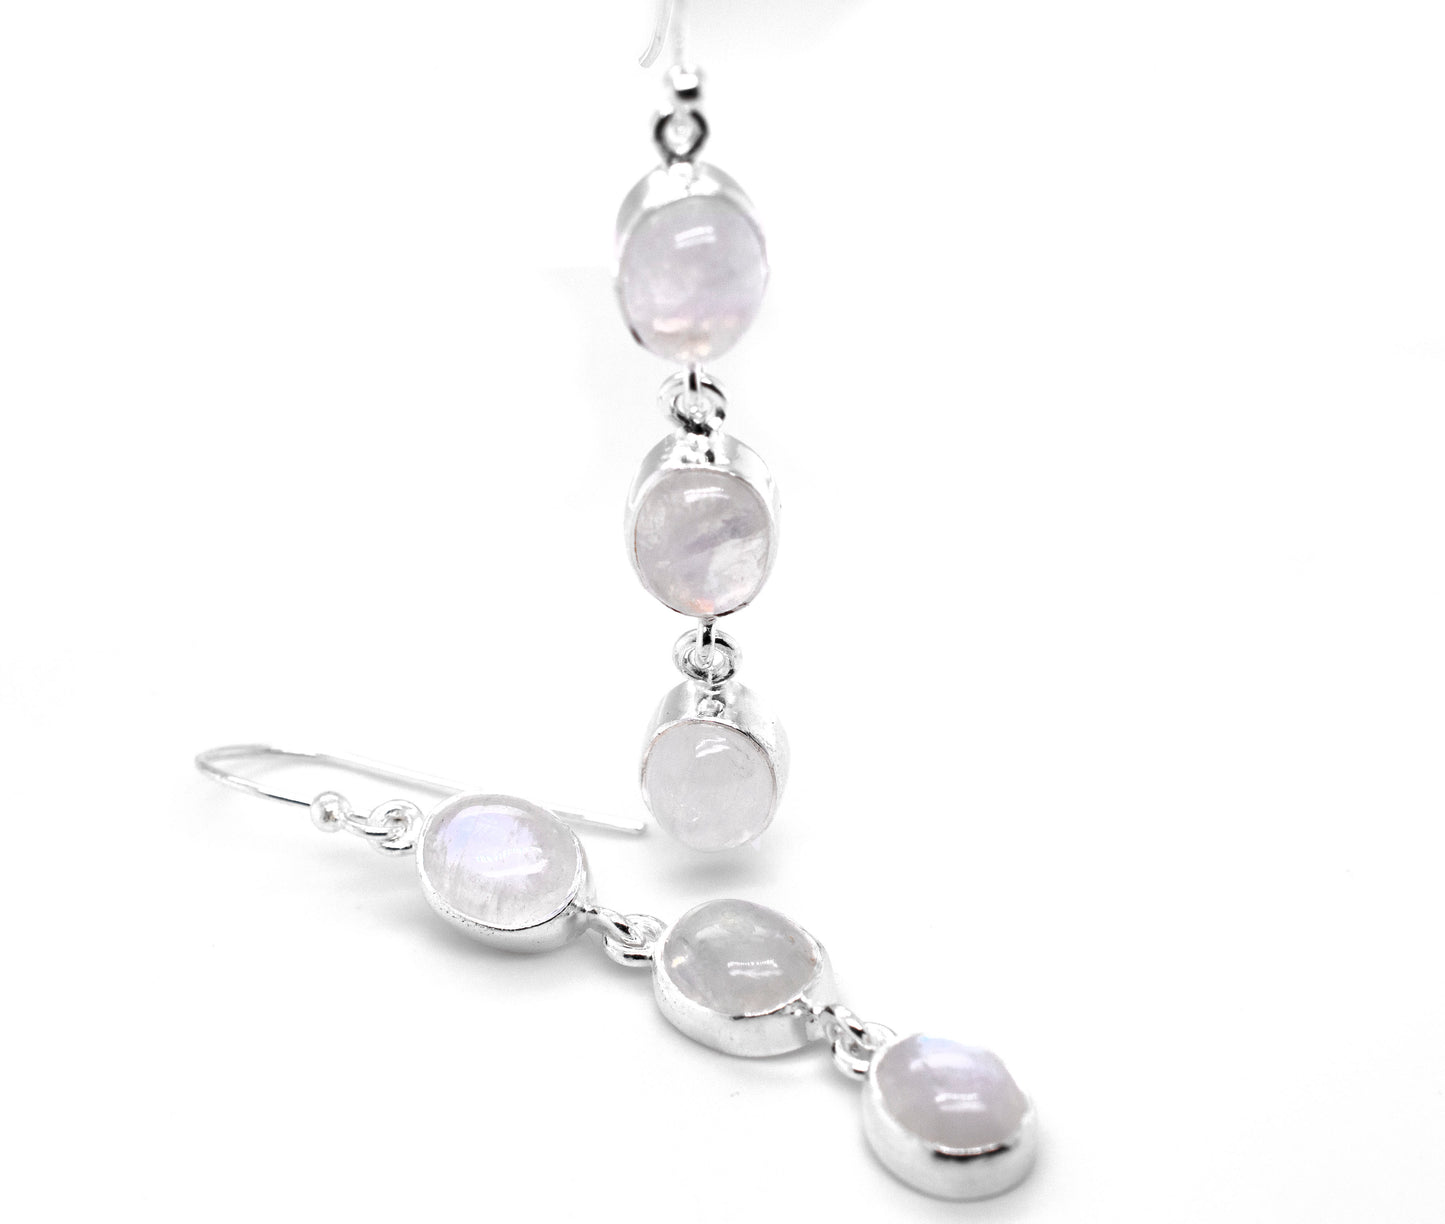 A pair of Radiant Long Earrings with Three Moonstones crafted in .925 sterling silver from Super Silver.